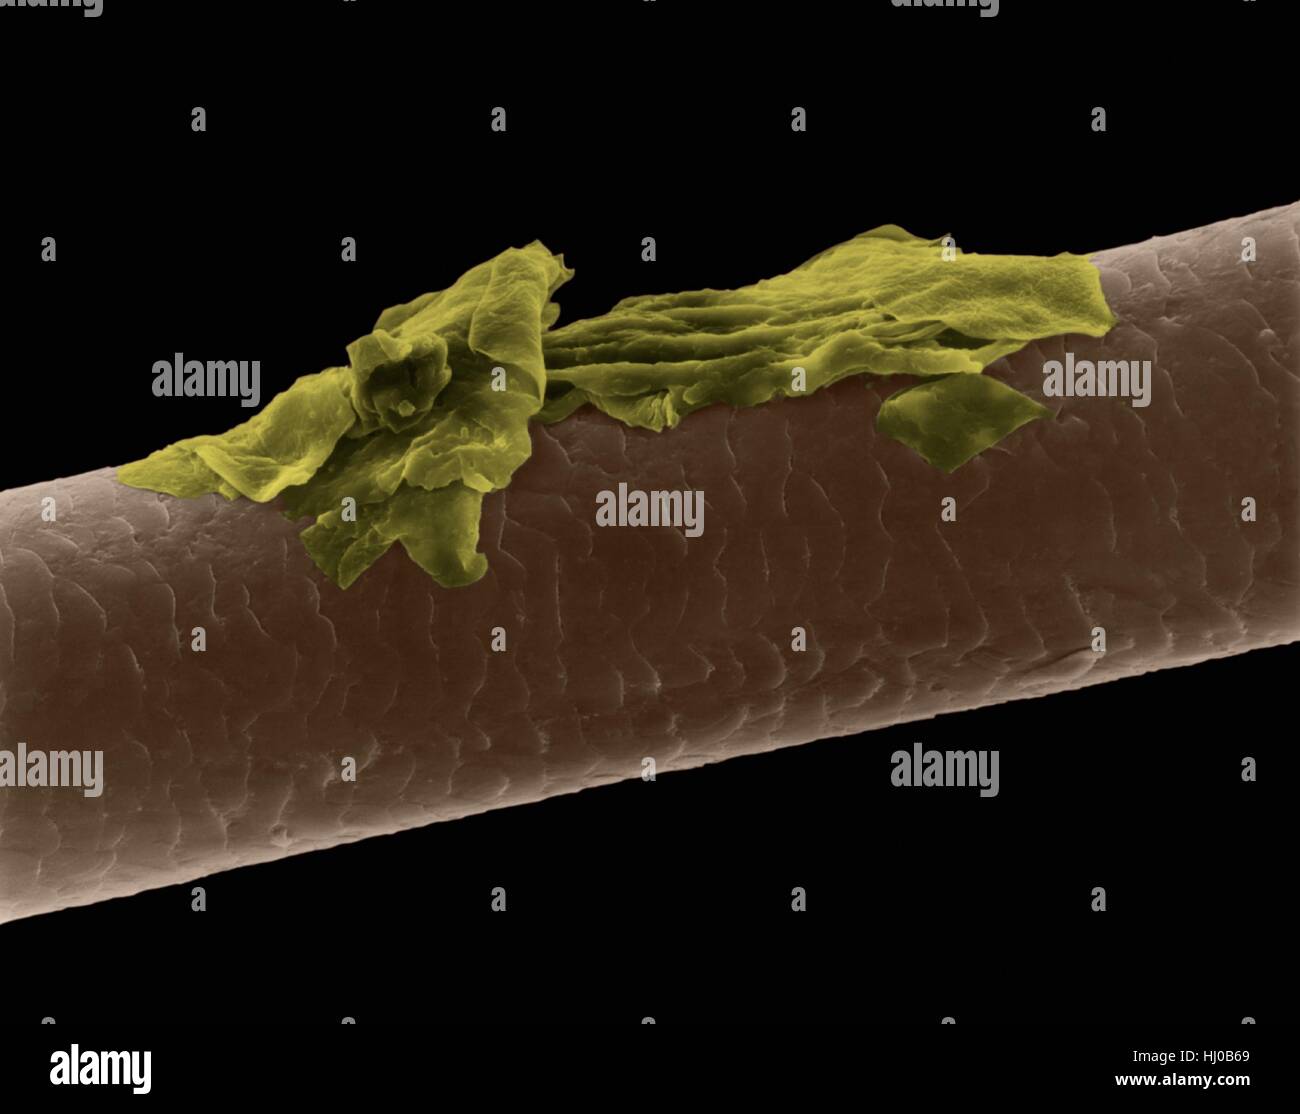 Human hair dandruff,coloured scanning electron micrograph (SEM).The outer  layer of hair (the cuticle) has overlapping scales of  scales  are thought to prevent hairs from matting  is made up of  fibrous